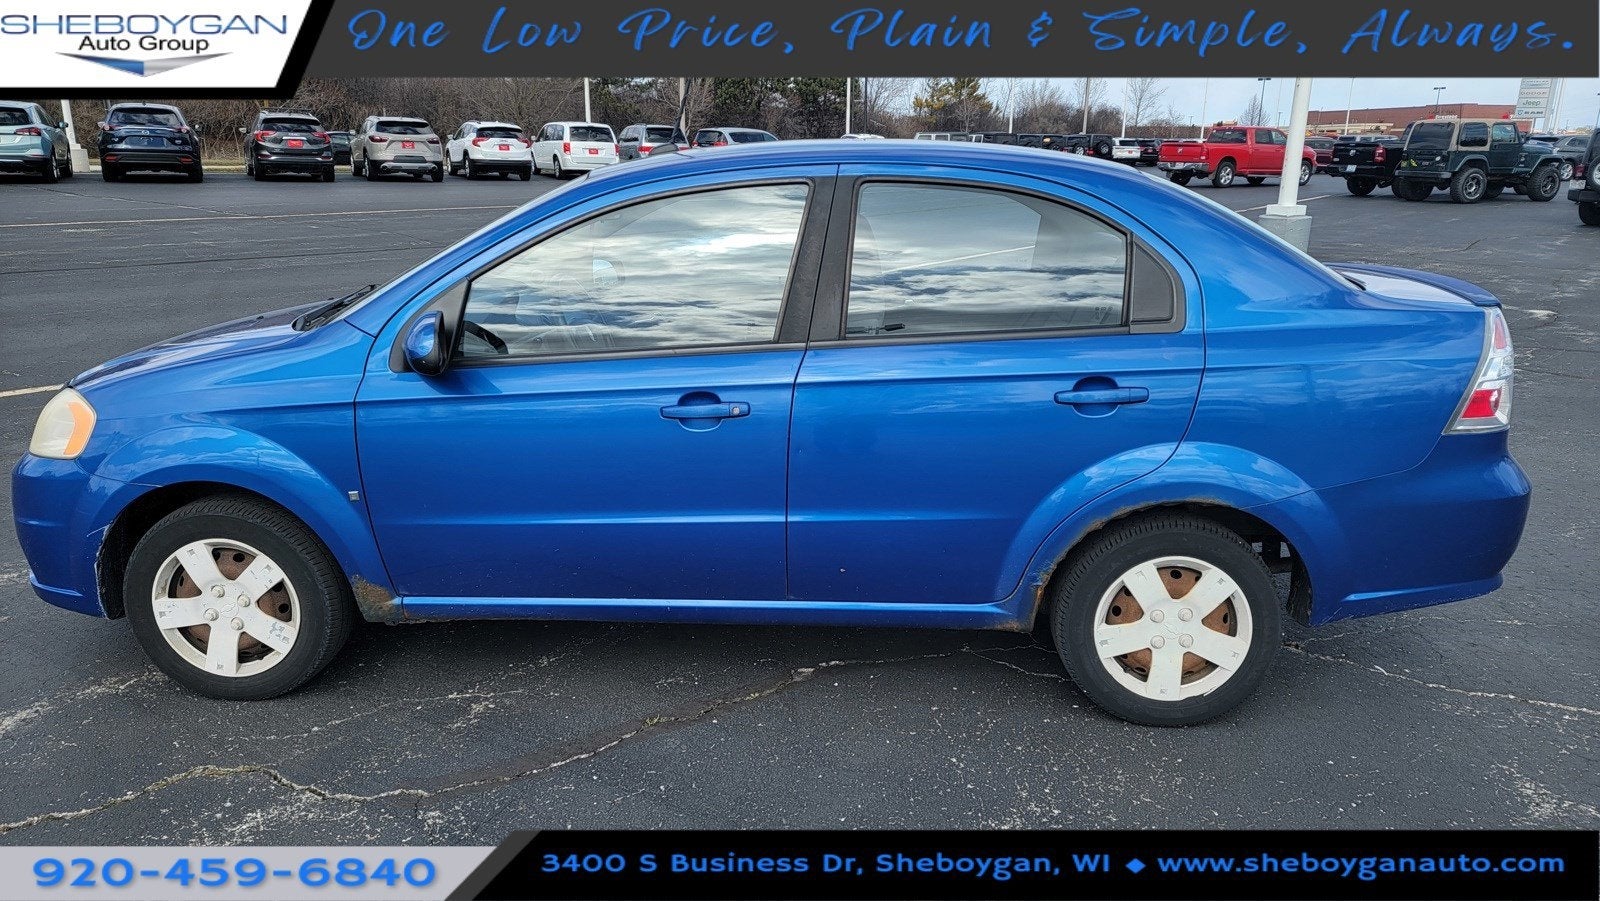 Used 2009 Chevrolet Aveo 1LS with VIN KL1TD56E89B626695 for sale in Sheboygan, WI